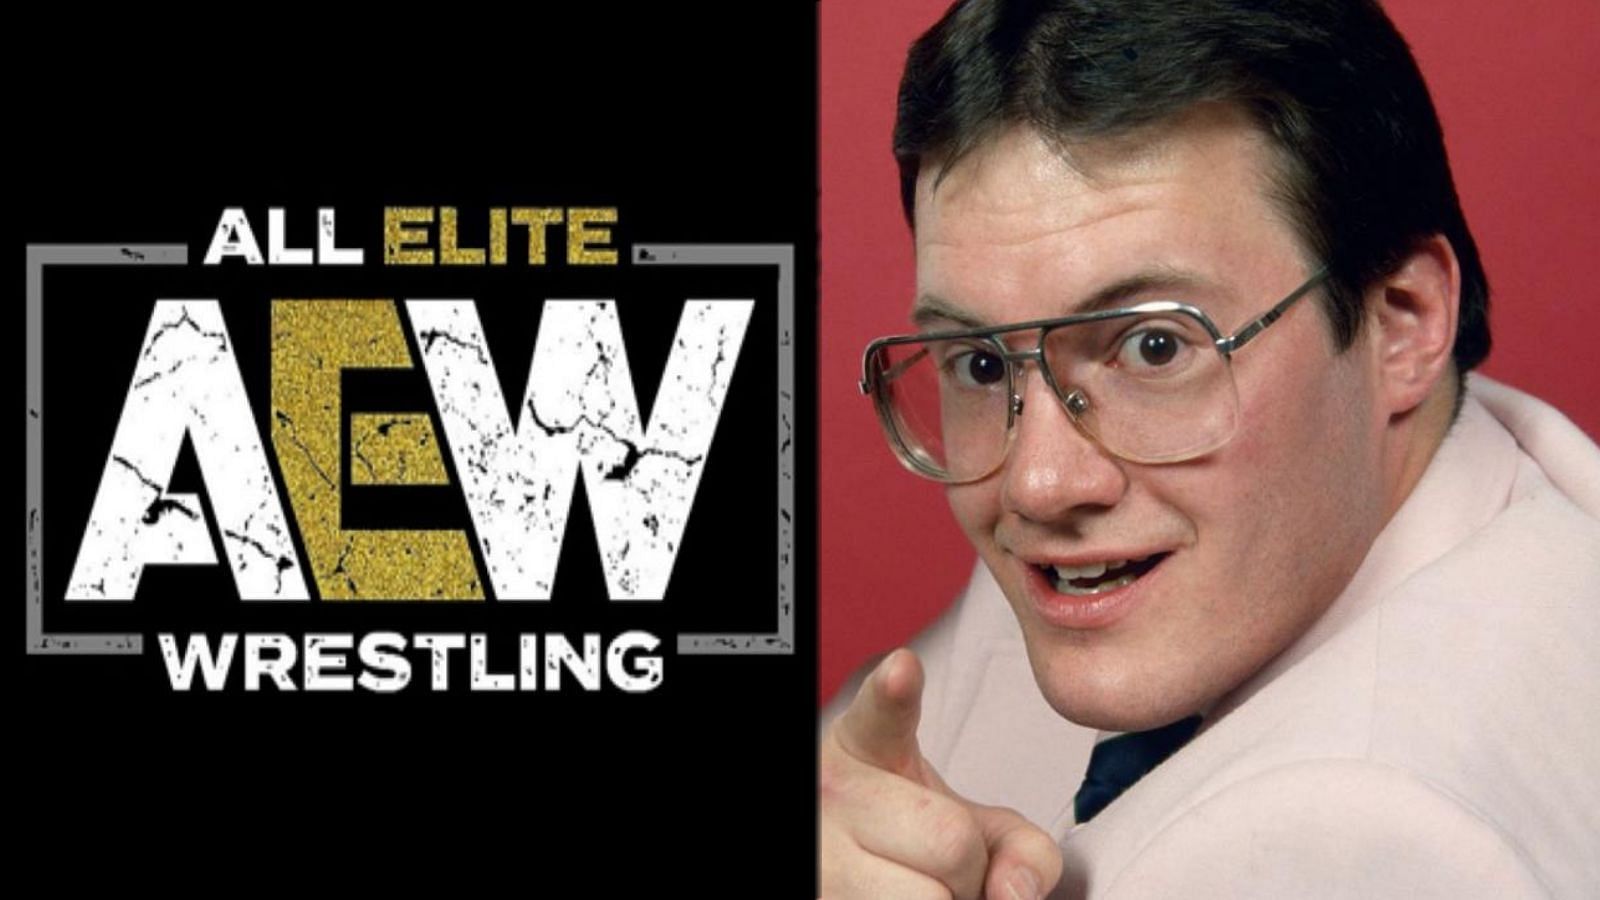 The former manager has another bone to pick with AEW.